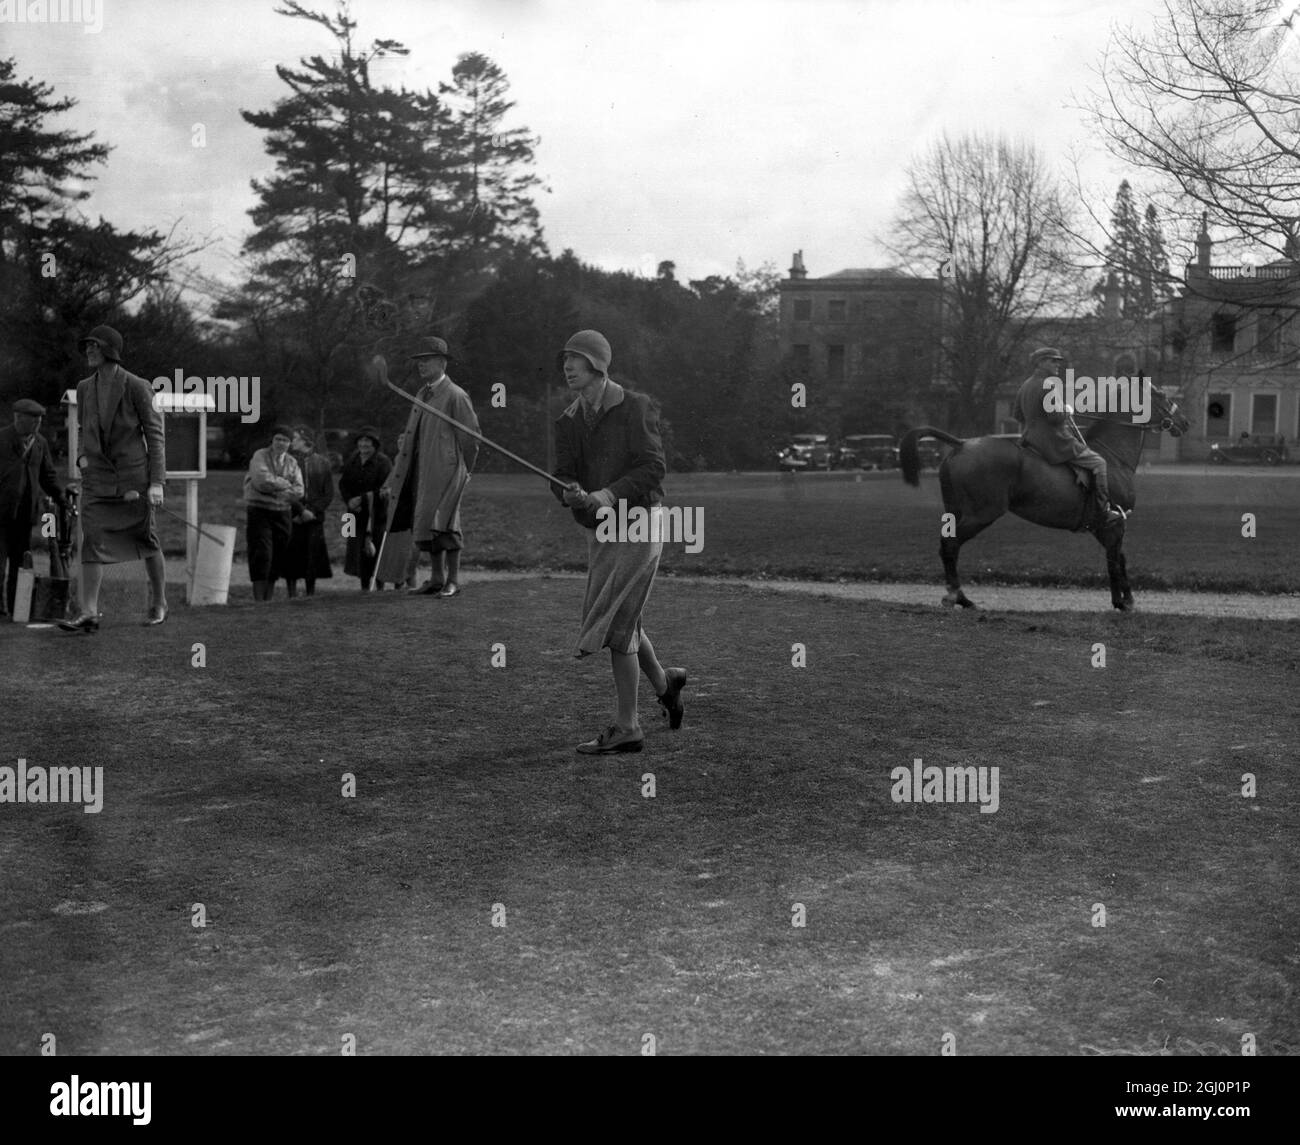 Famous sportswomen met on the Burhill course , Surrey , for the Ladies Open meeting at the Women ' s Amateur Sports Association challenge trophy . Photo shows ; Miss J Hughes in play during the match . 31 March 1932 Stock Photo